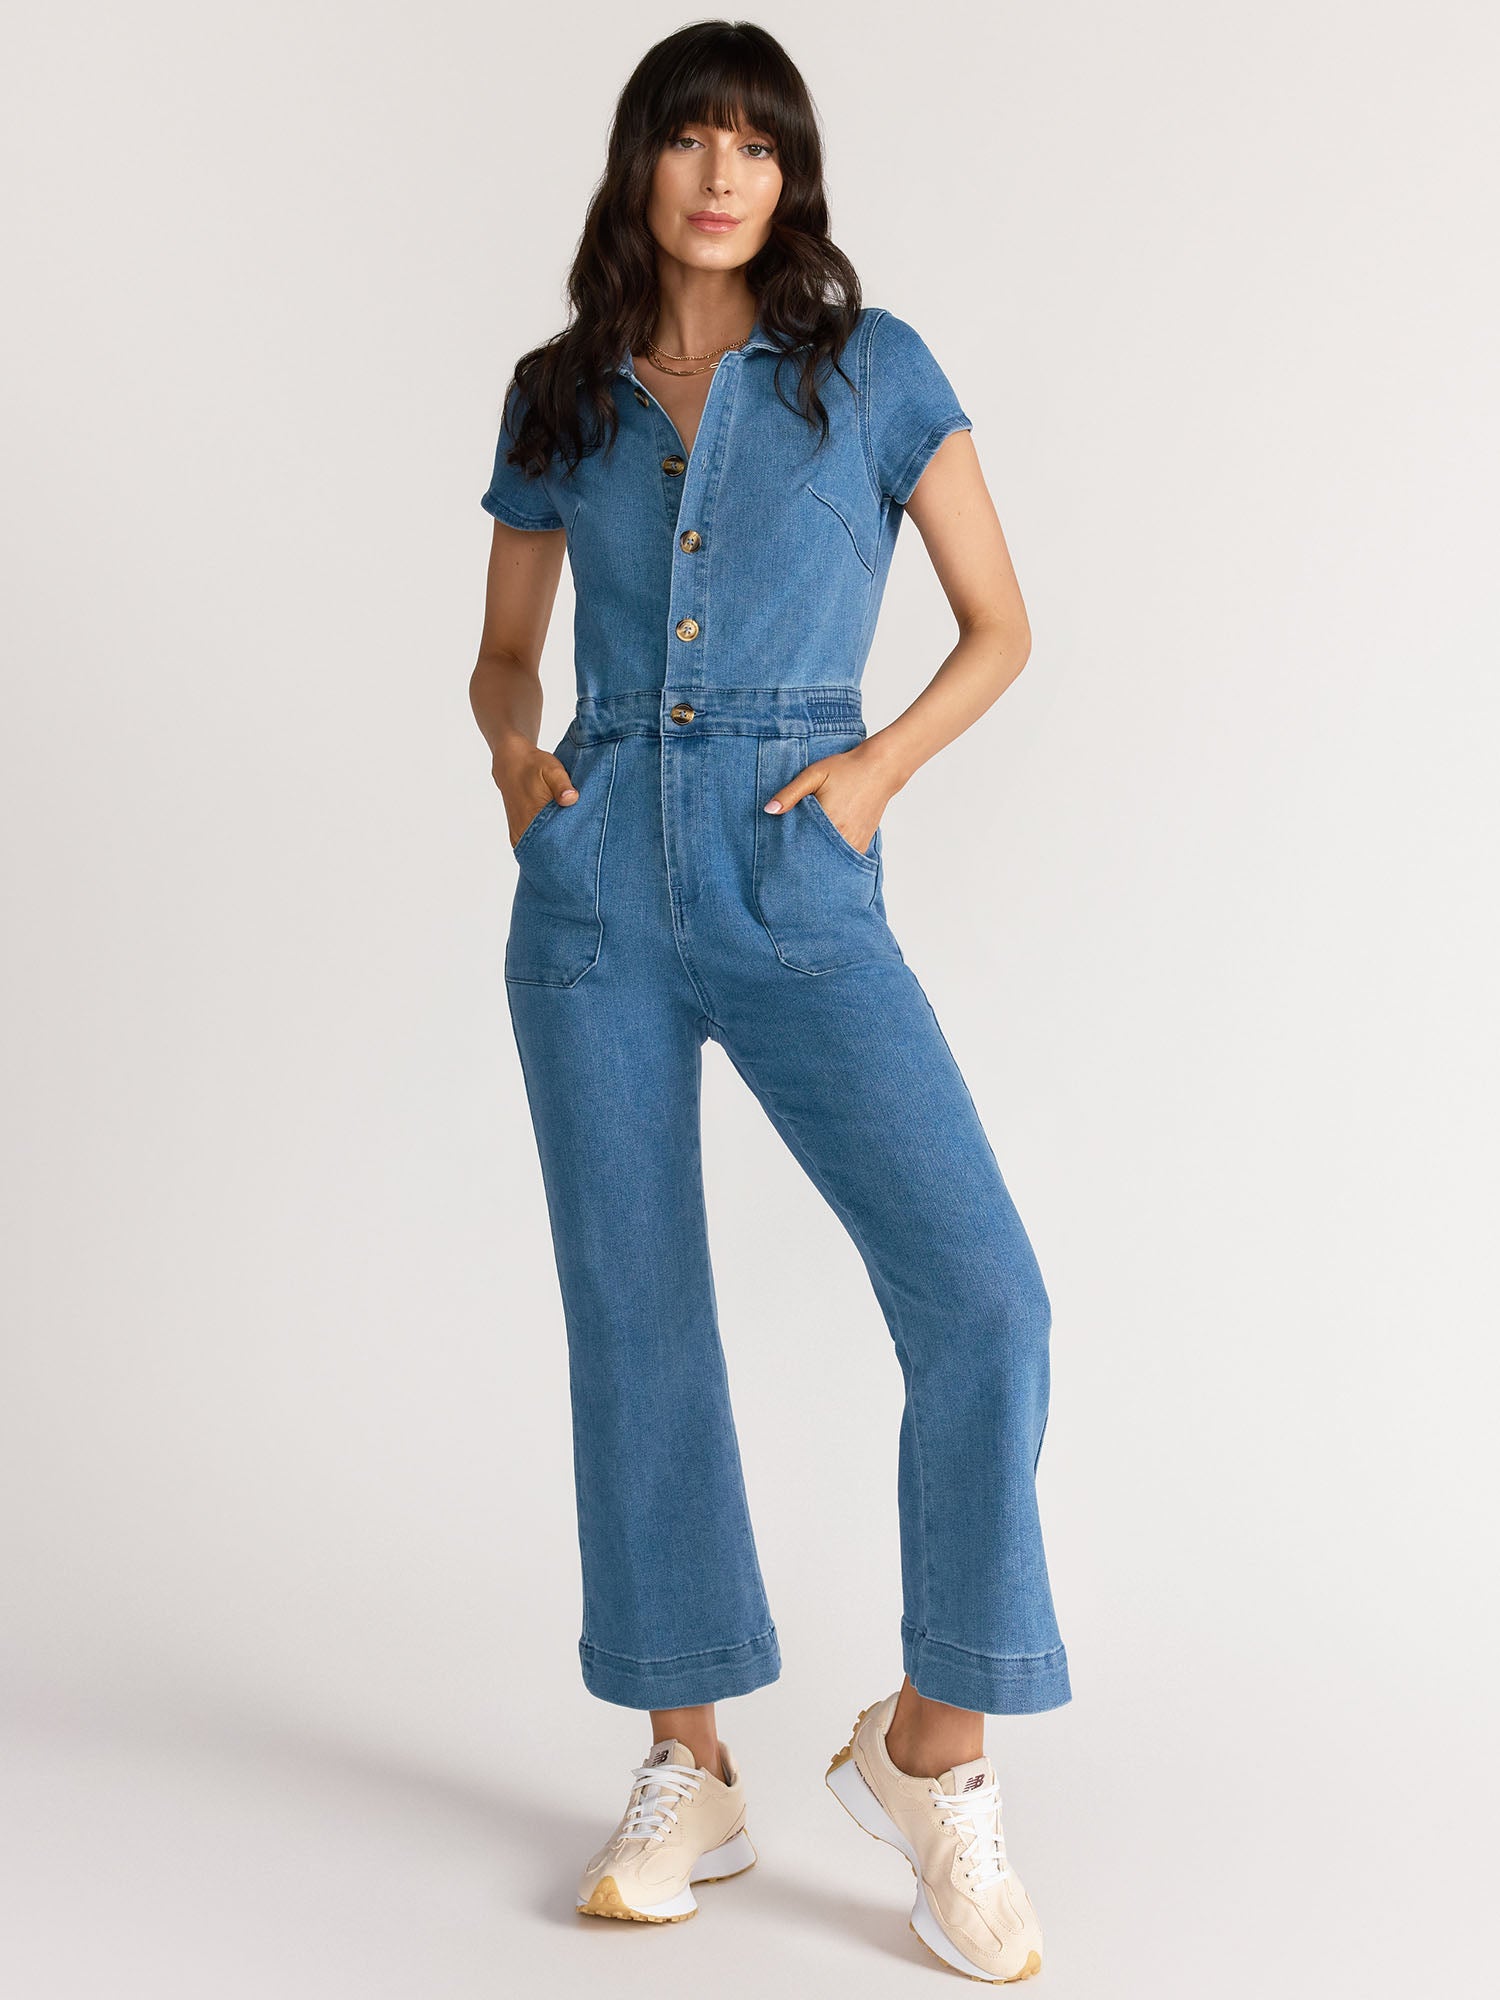 Aaron And Amber Short Sleeve Denim Jumpsuit - Brands We Love | NY&Co